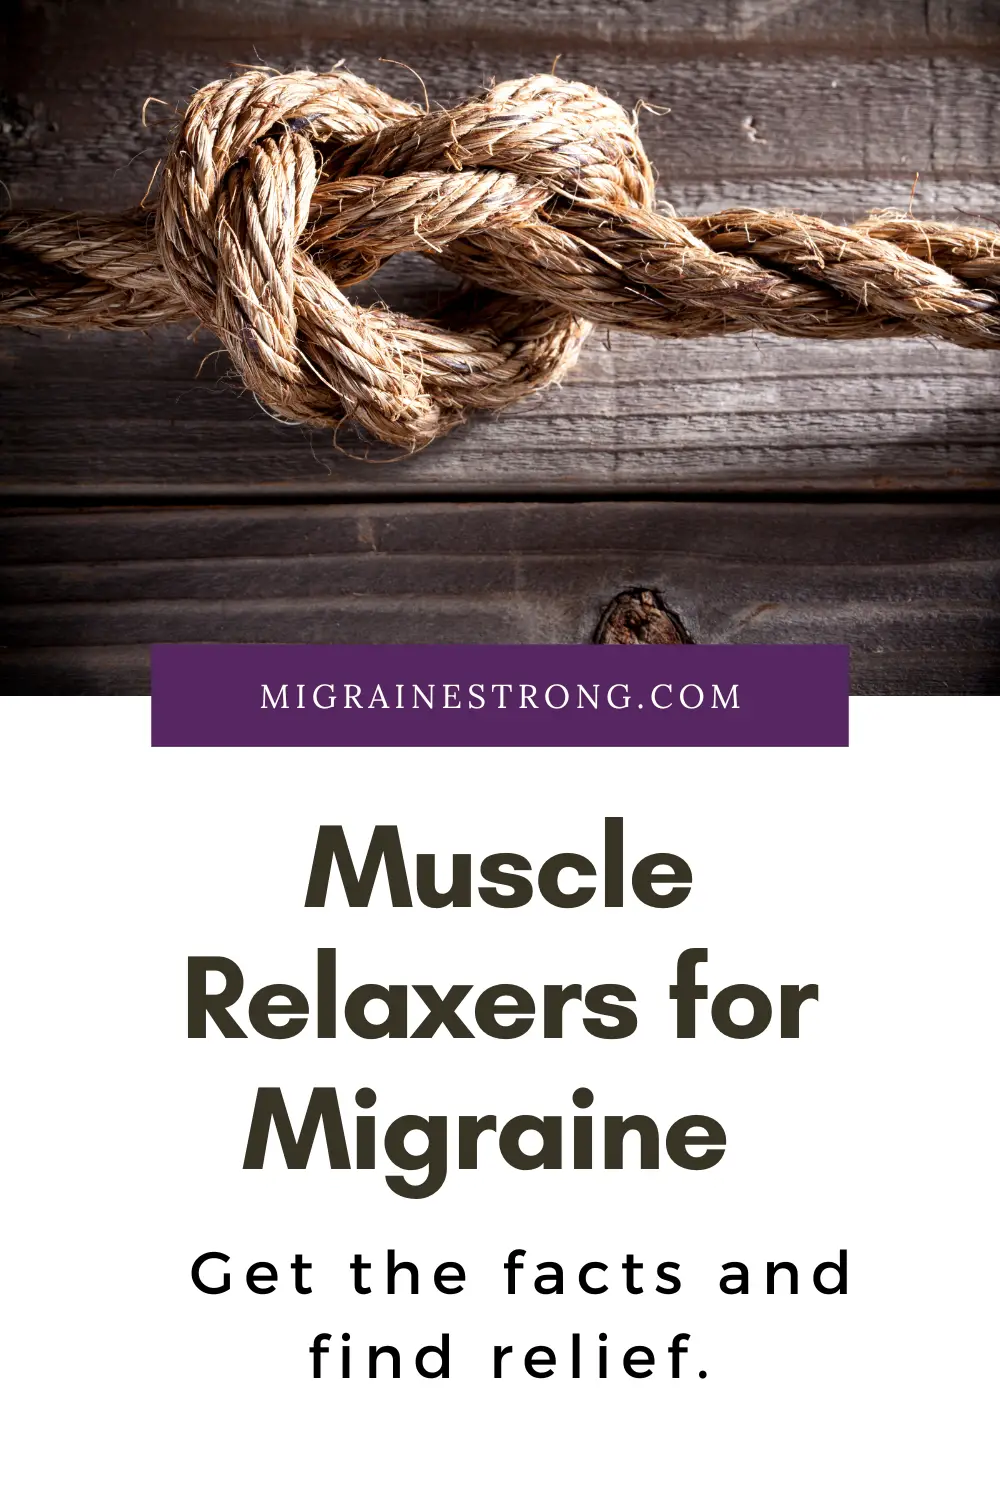 Muscle Relaxers for Migraine and Headache - Helpful Information for Relief